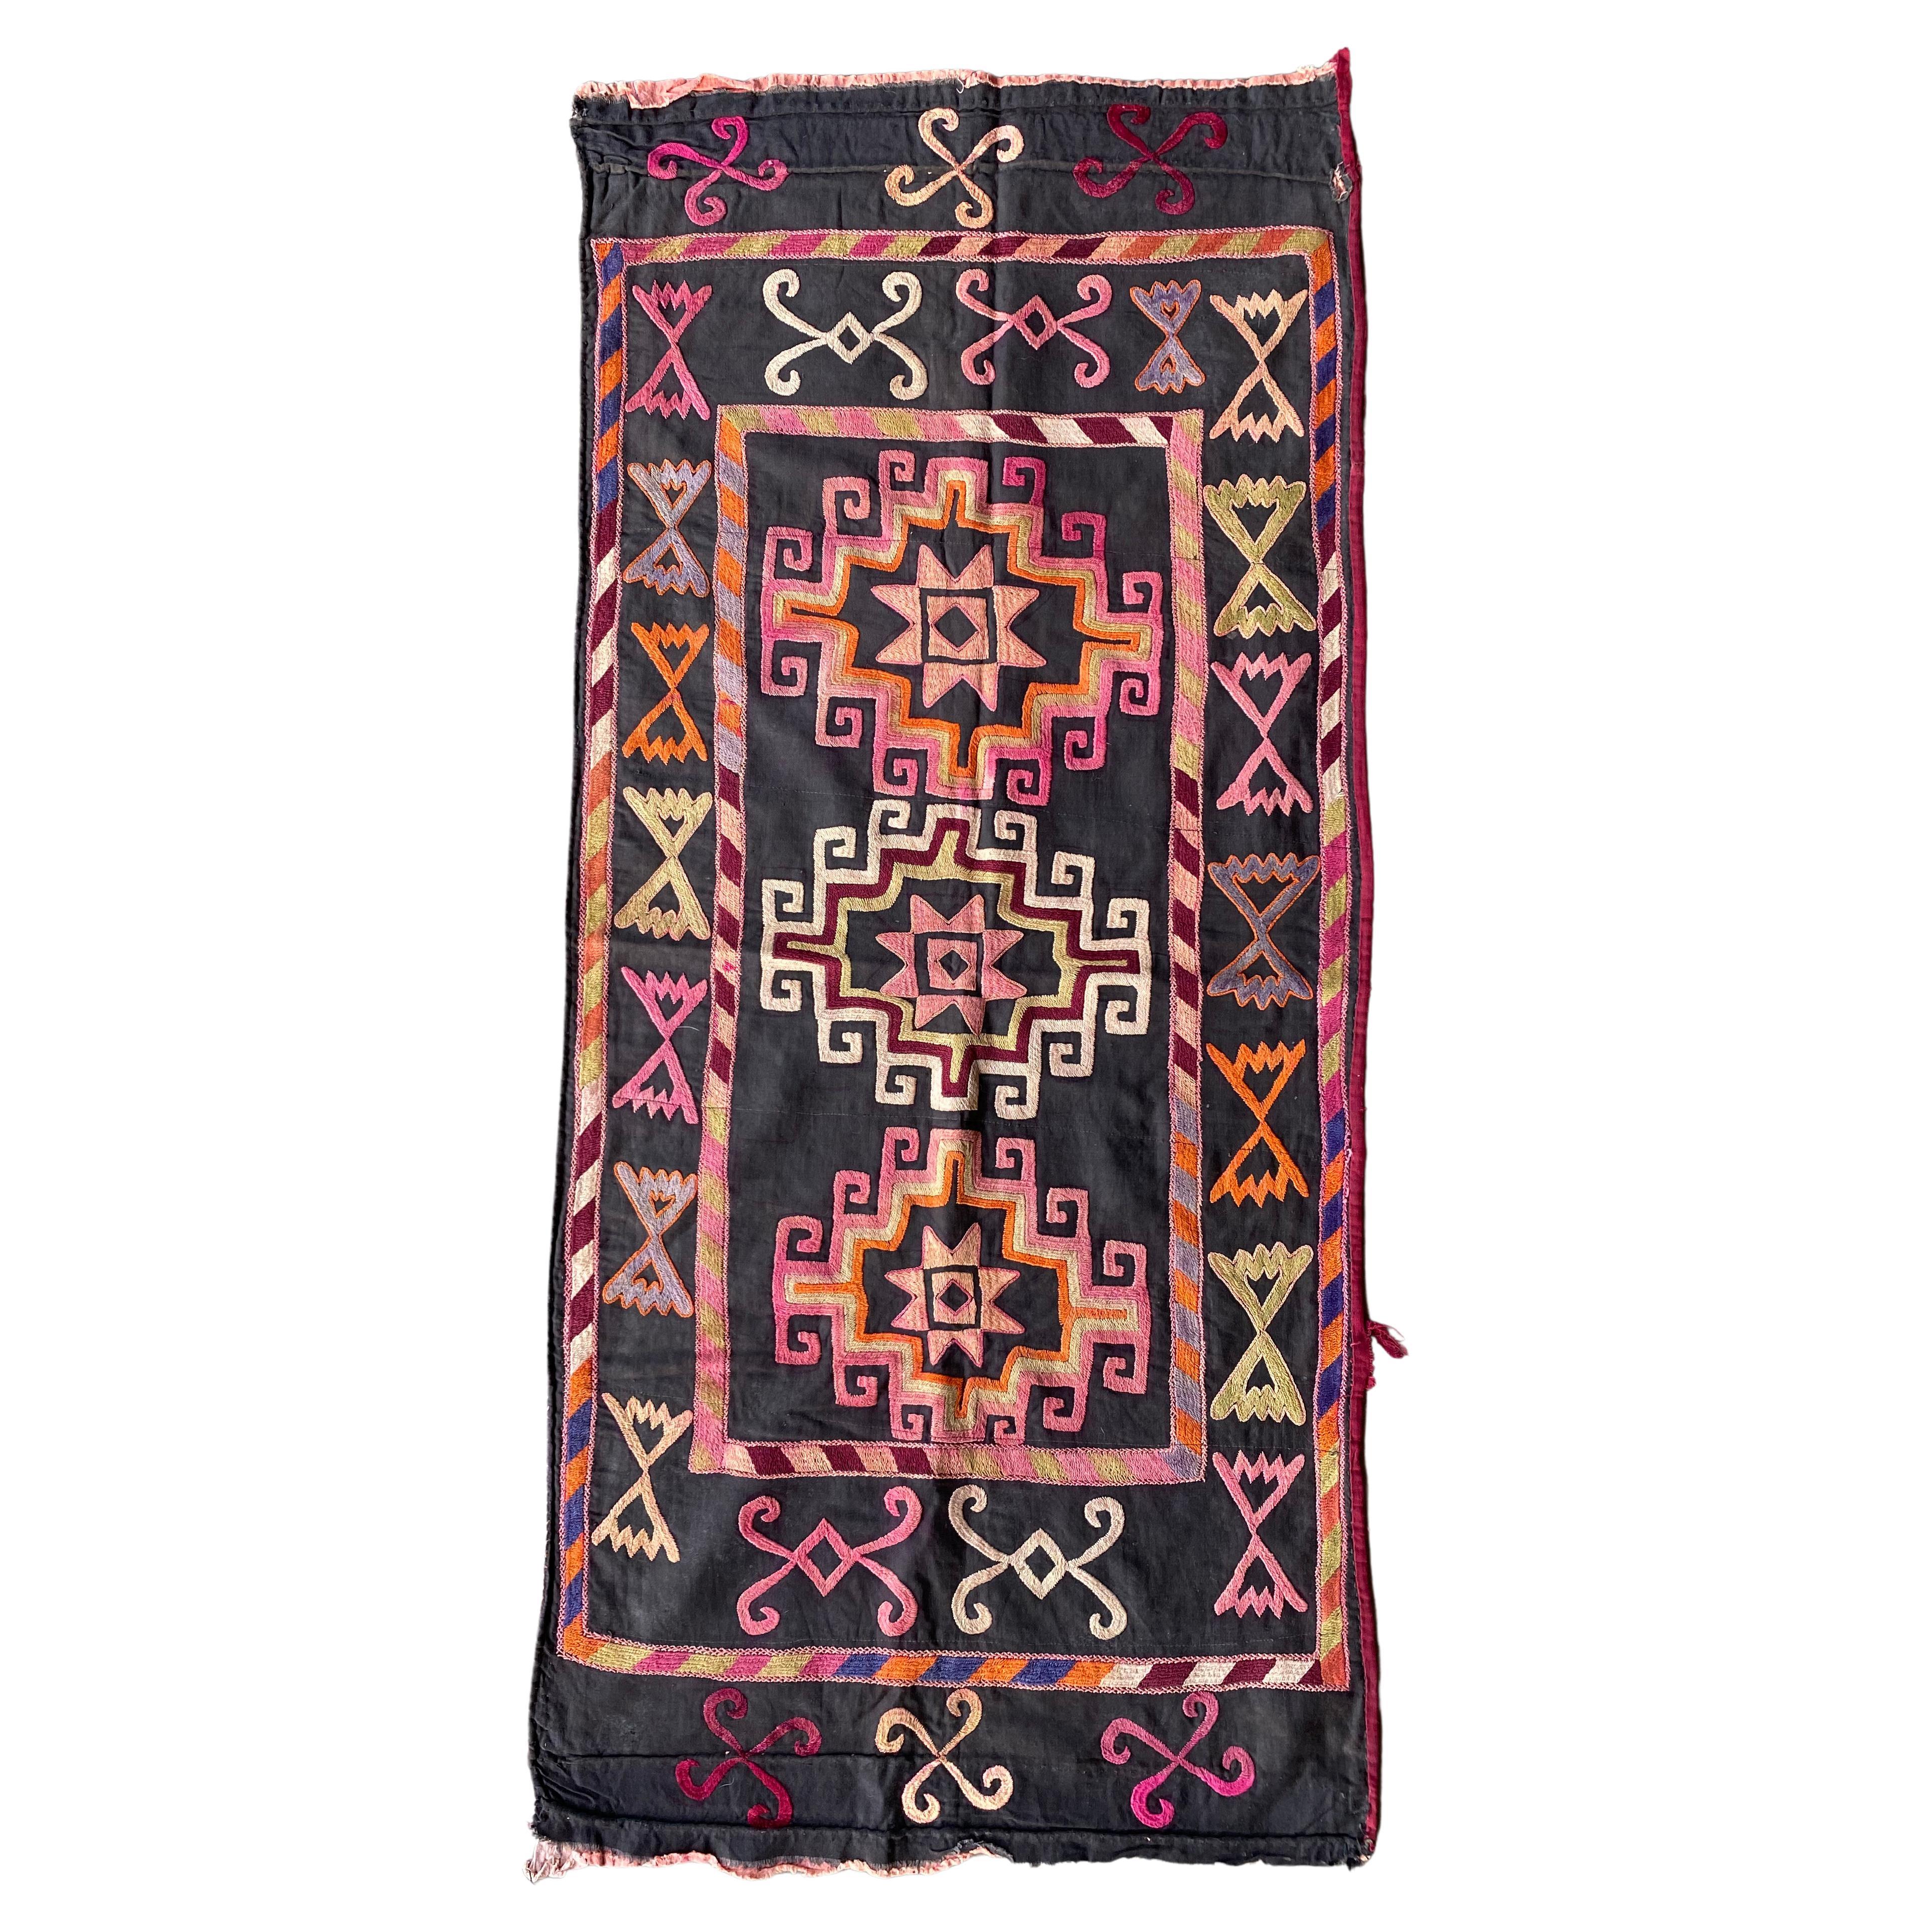 Central Asian Embroidered Textile, “Suzani”, Mid 20th Century  For Sale